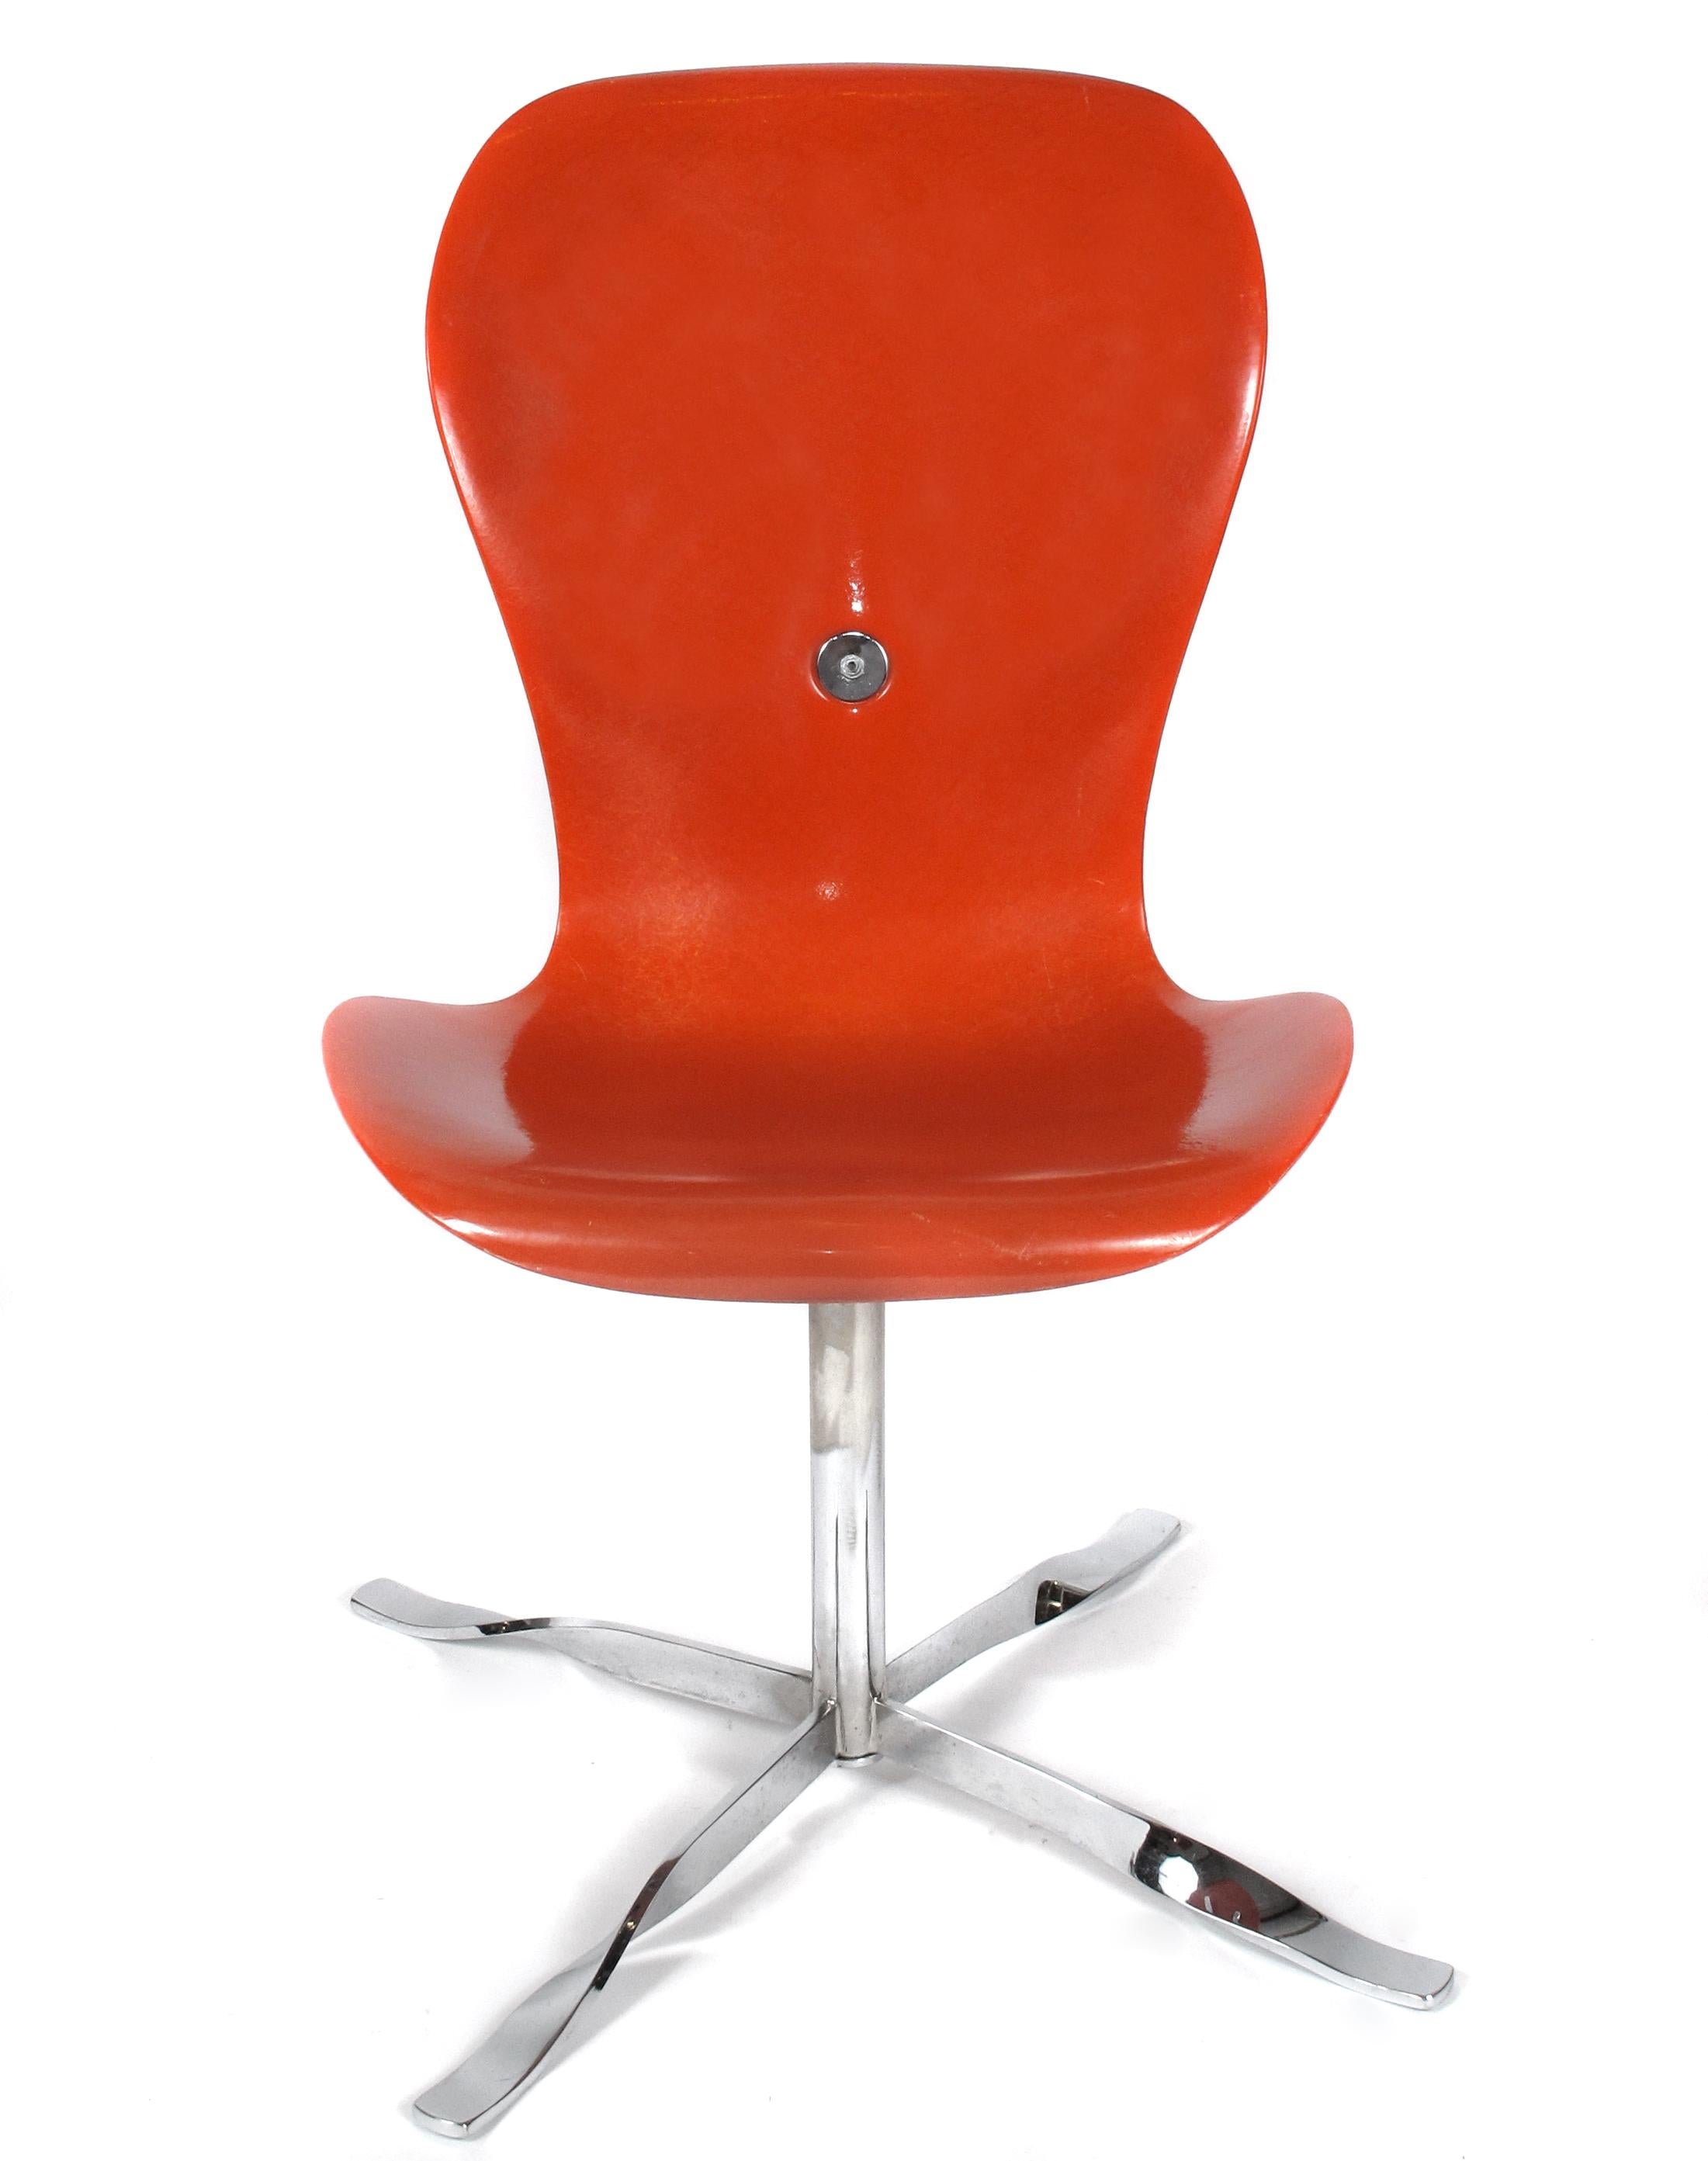 Classic chair designed by Gideon Kramer design for the Seattle space needle. We have 5 red and 5 yellow available.
 